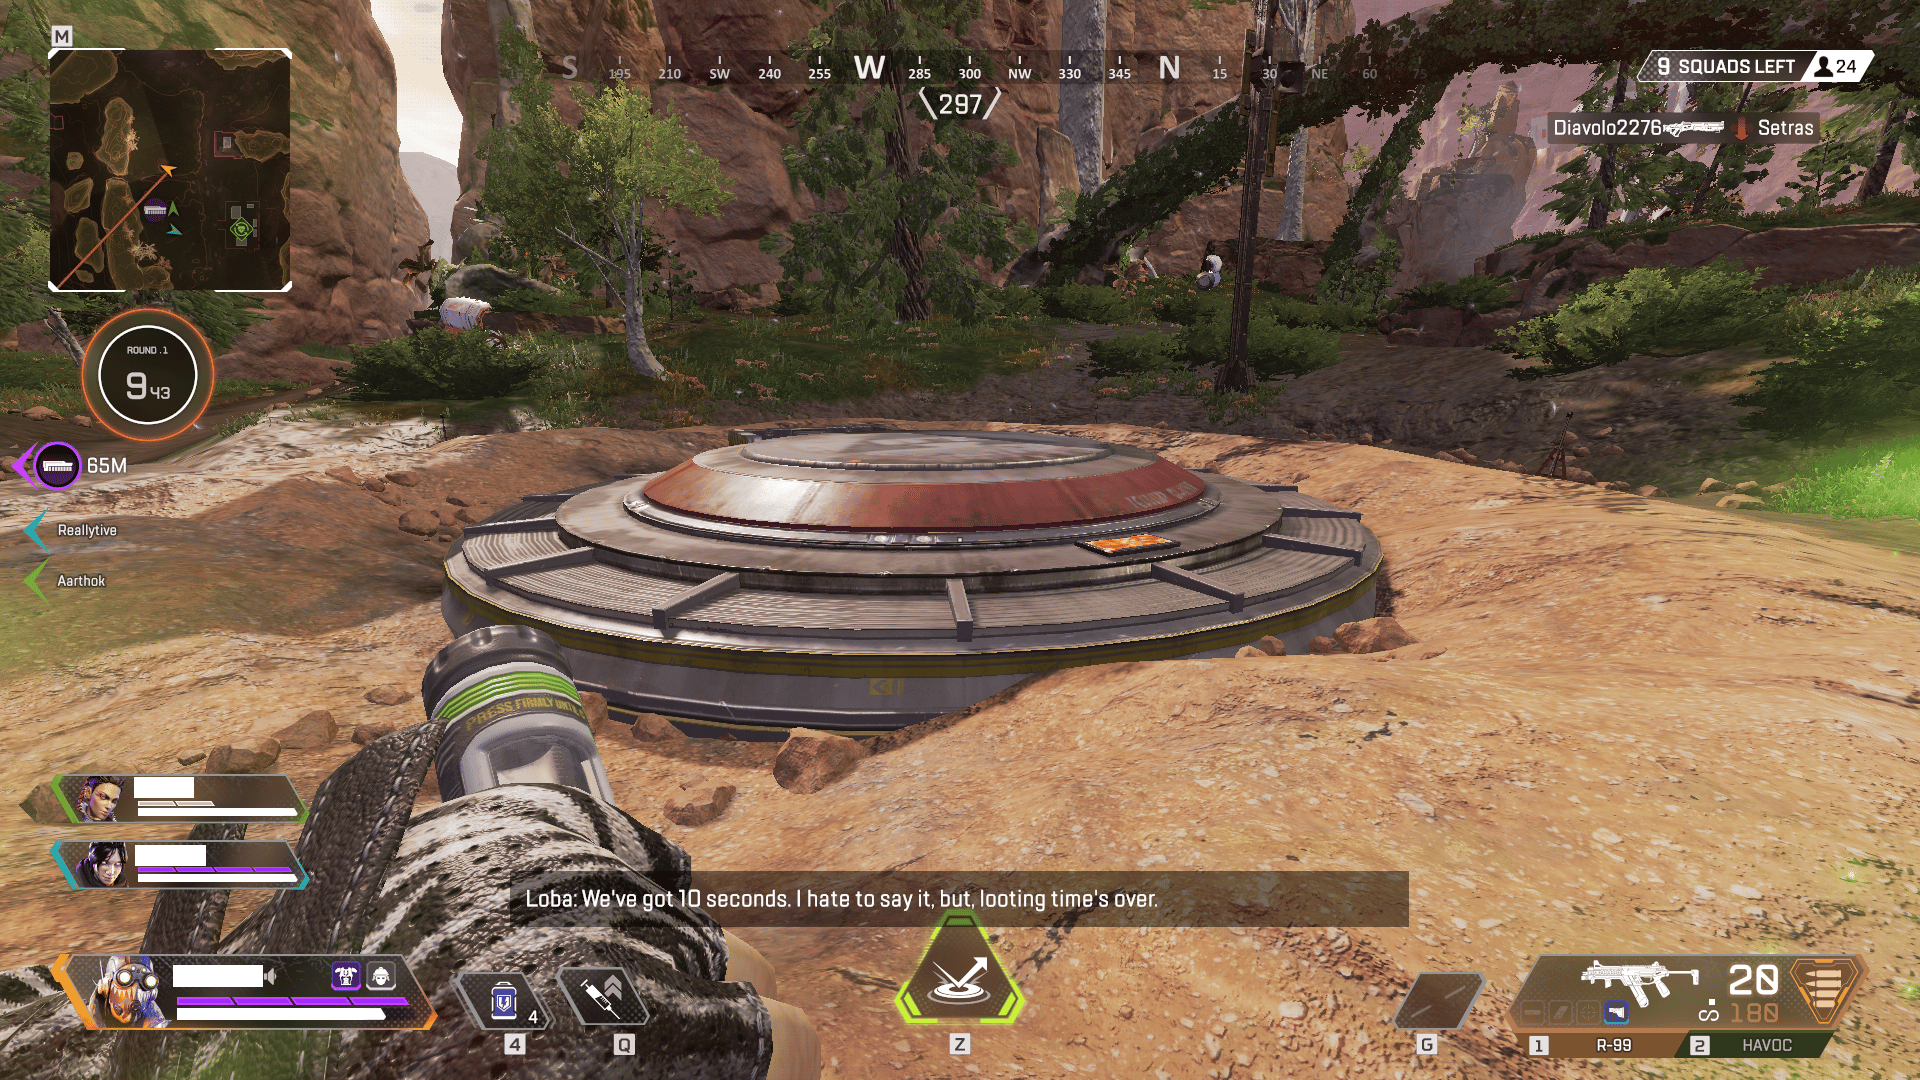 Apex Legends fans are eagerly awaiting the reveal of what's inside the Kings Canyon bunkers.